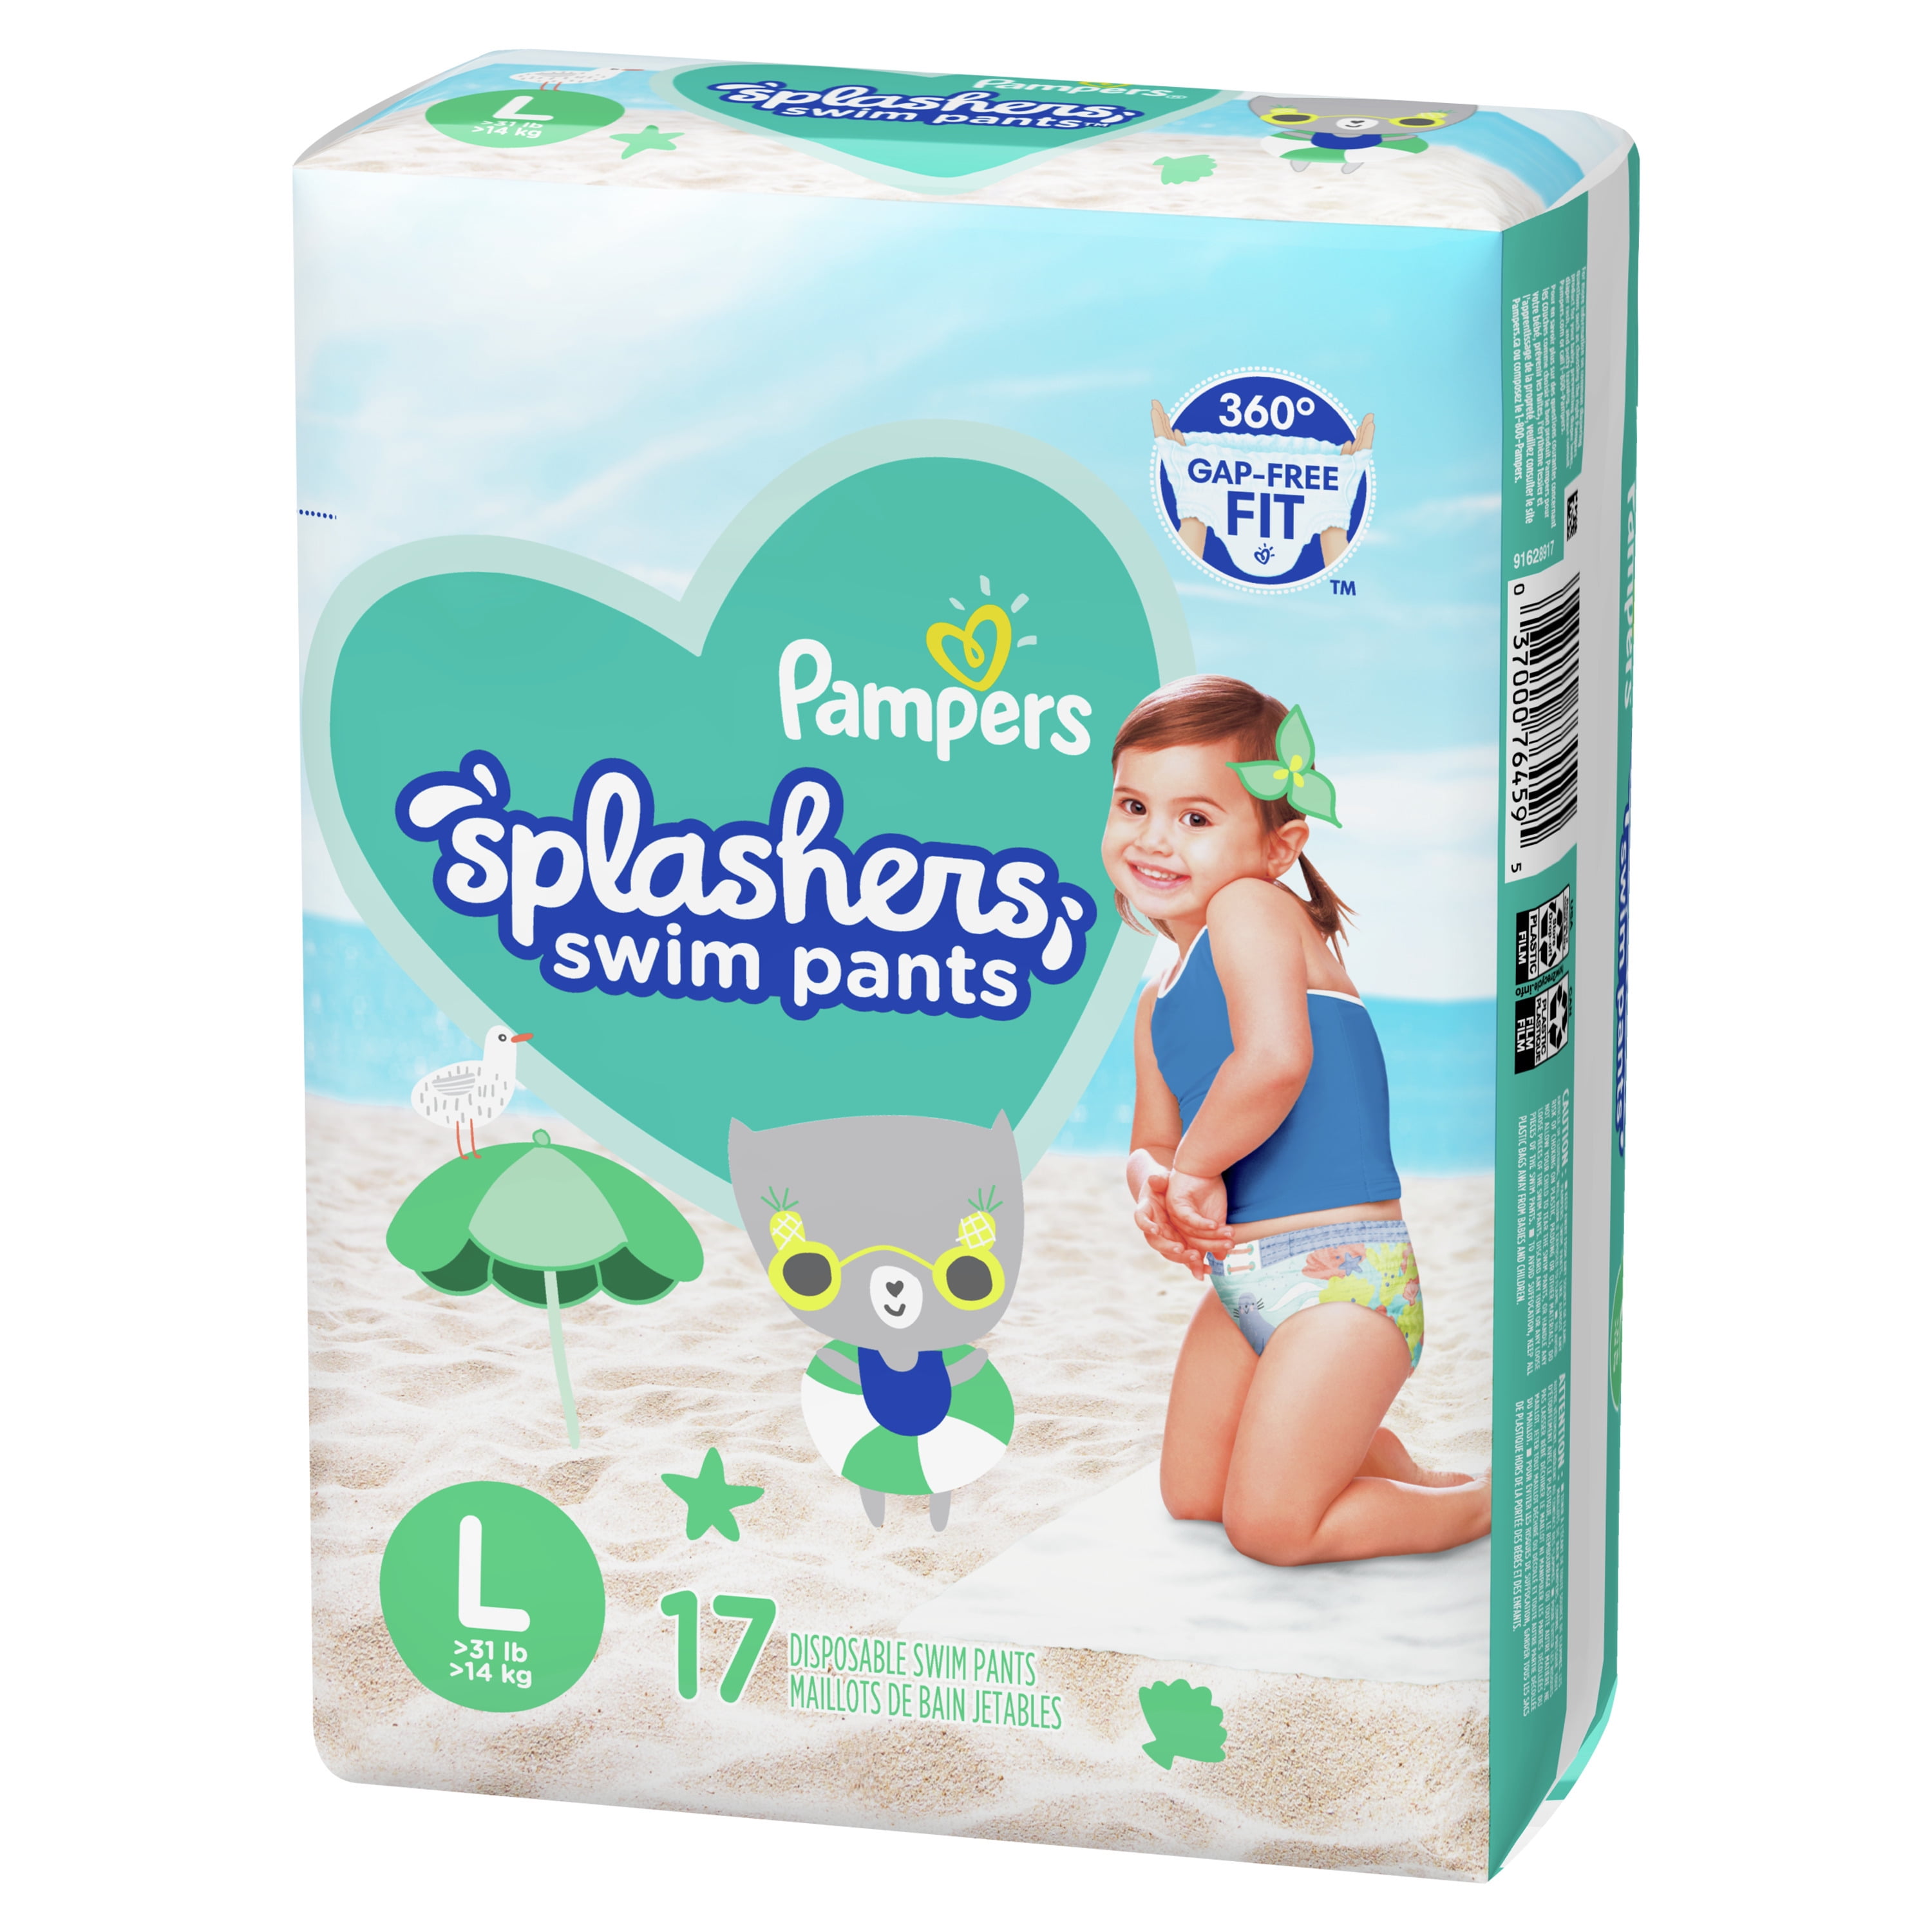 Dodot Splashers Size 5-6 10 Units Diapers Clear